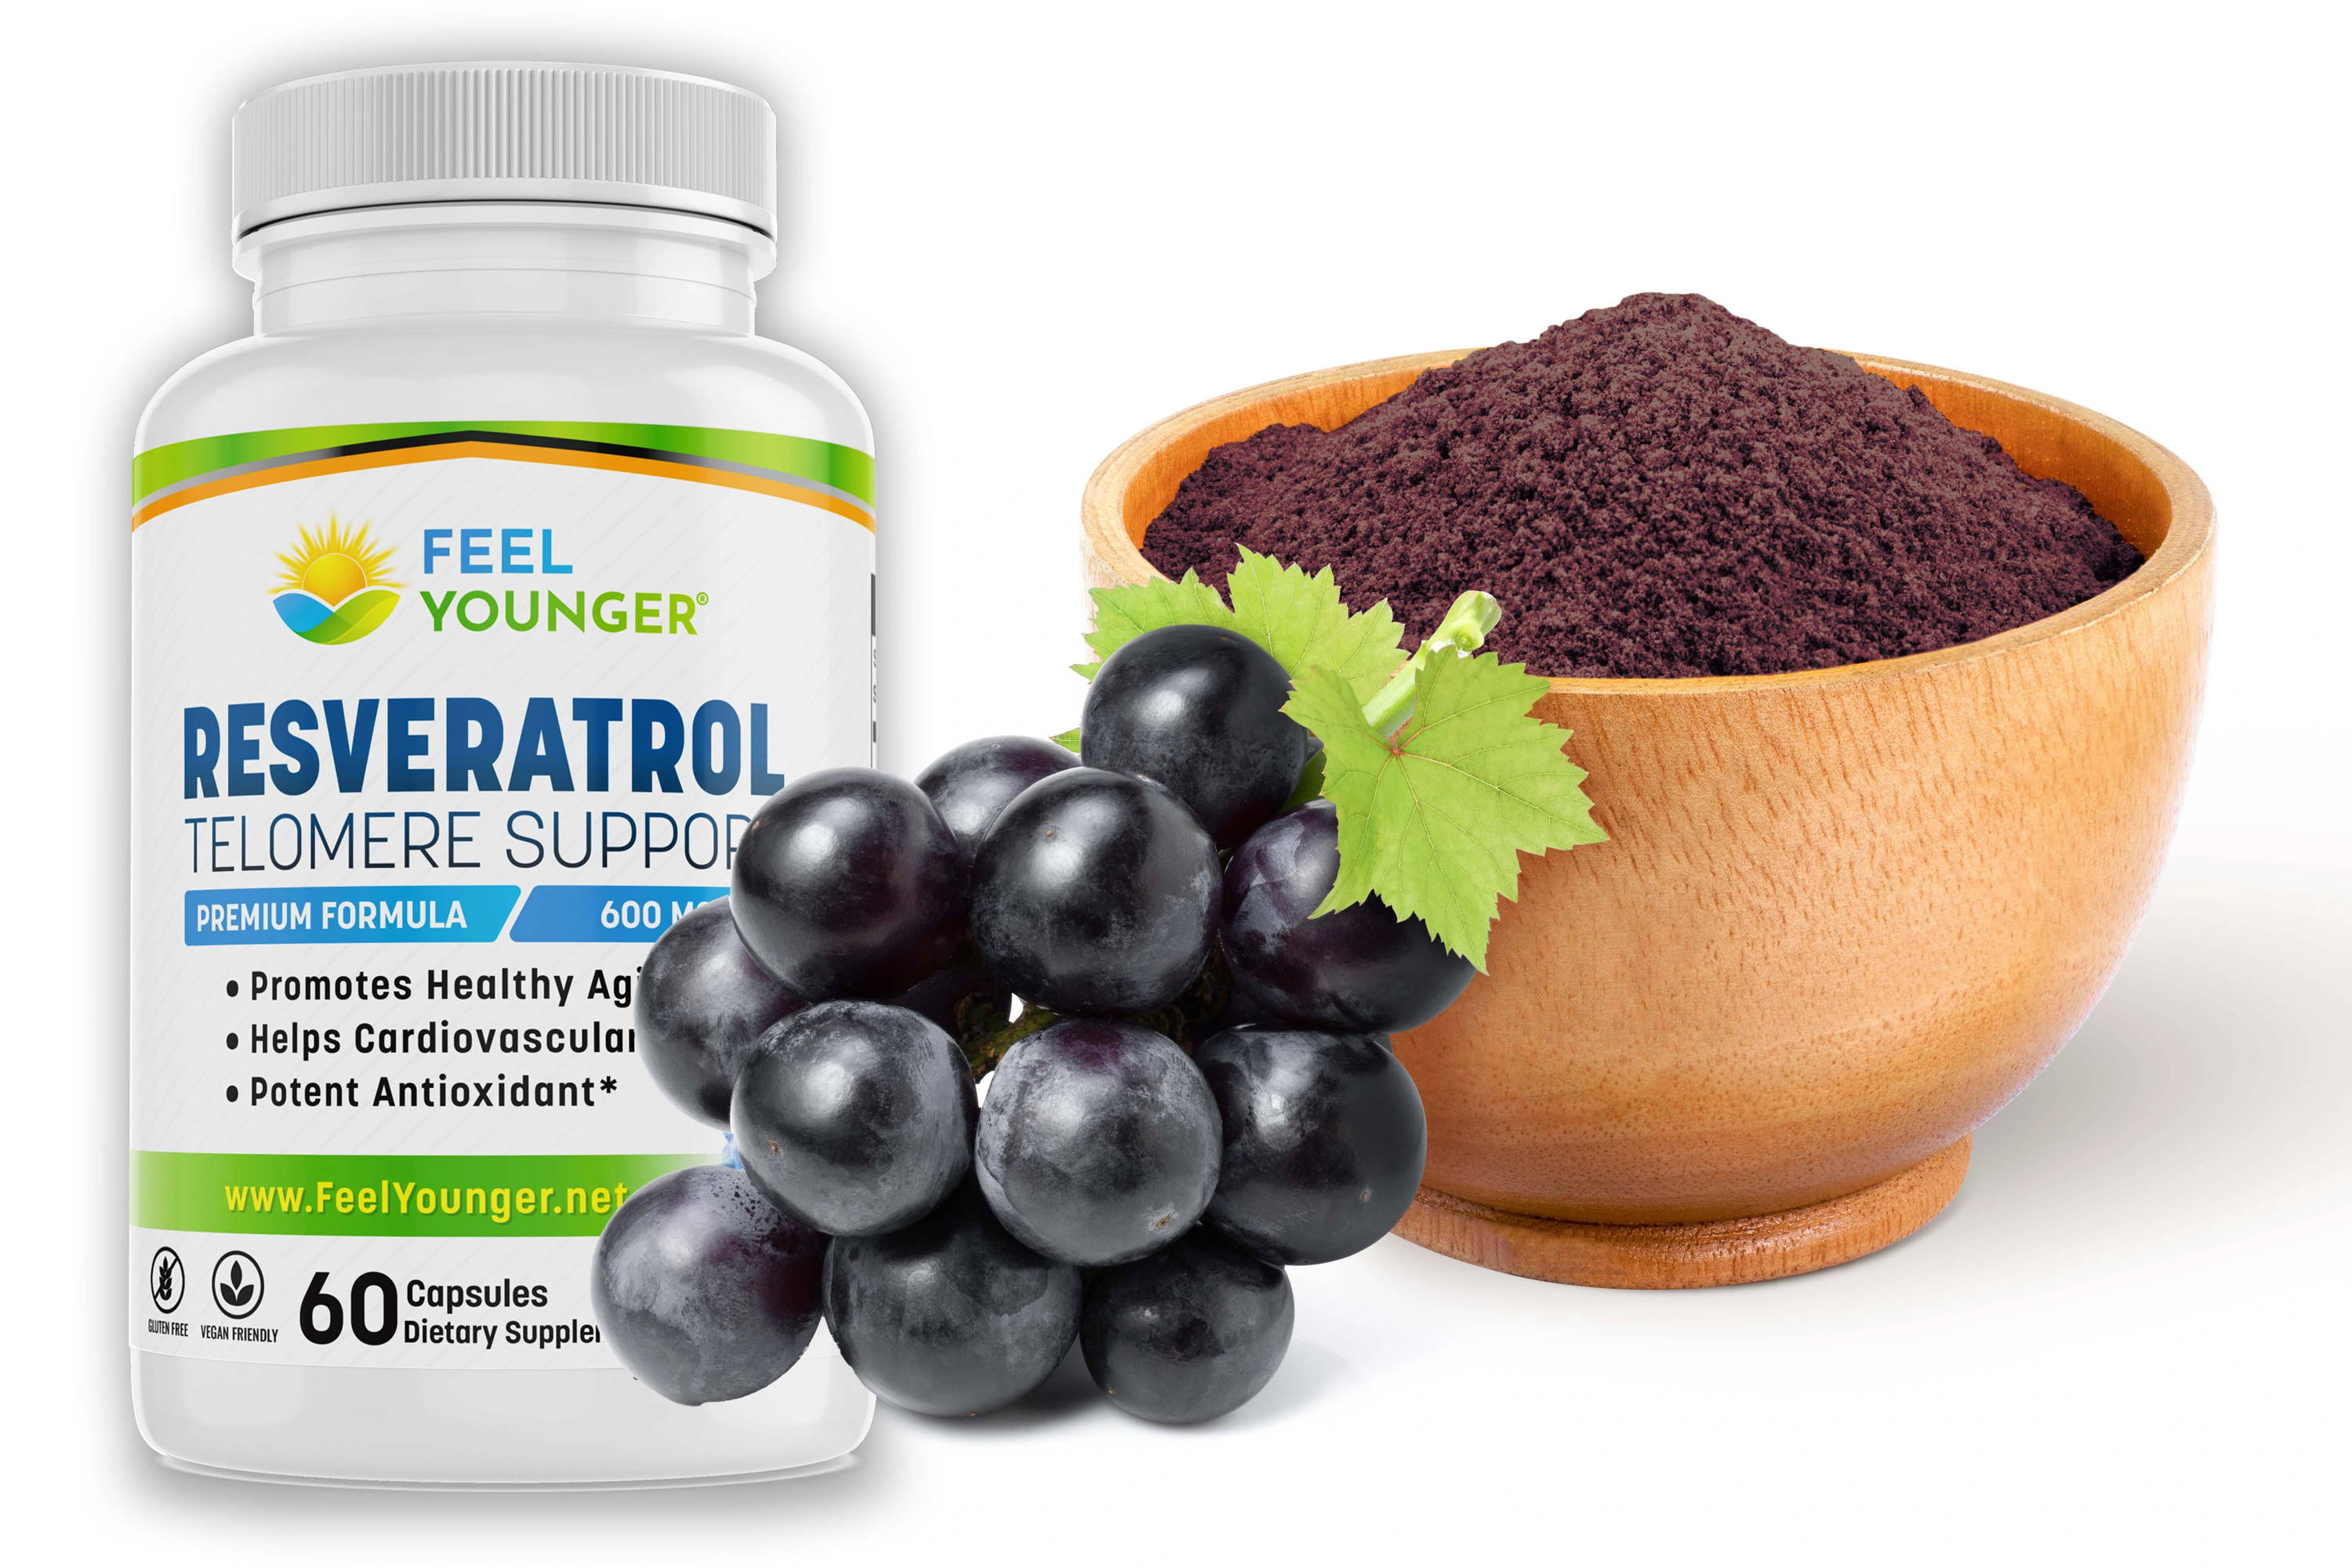 Feel Younger pure resveratrol might be the best resveratrol supplement on the internet